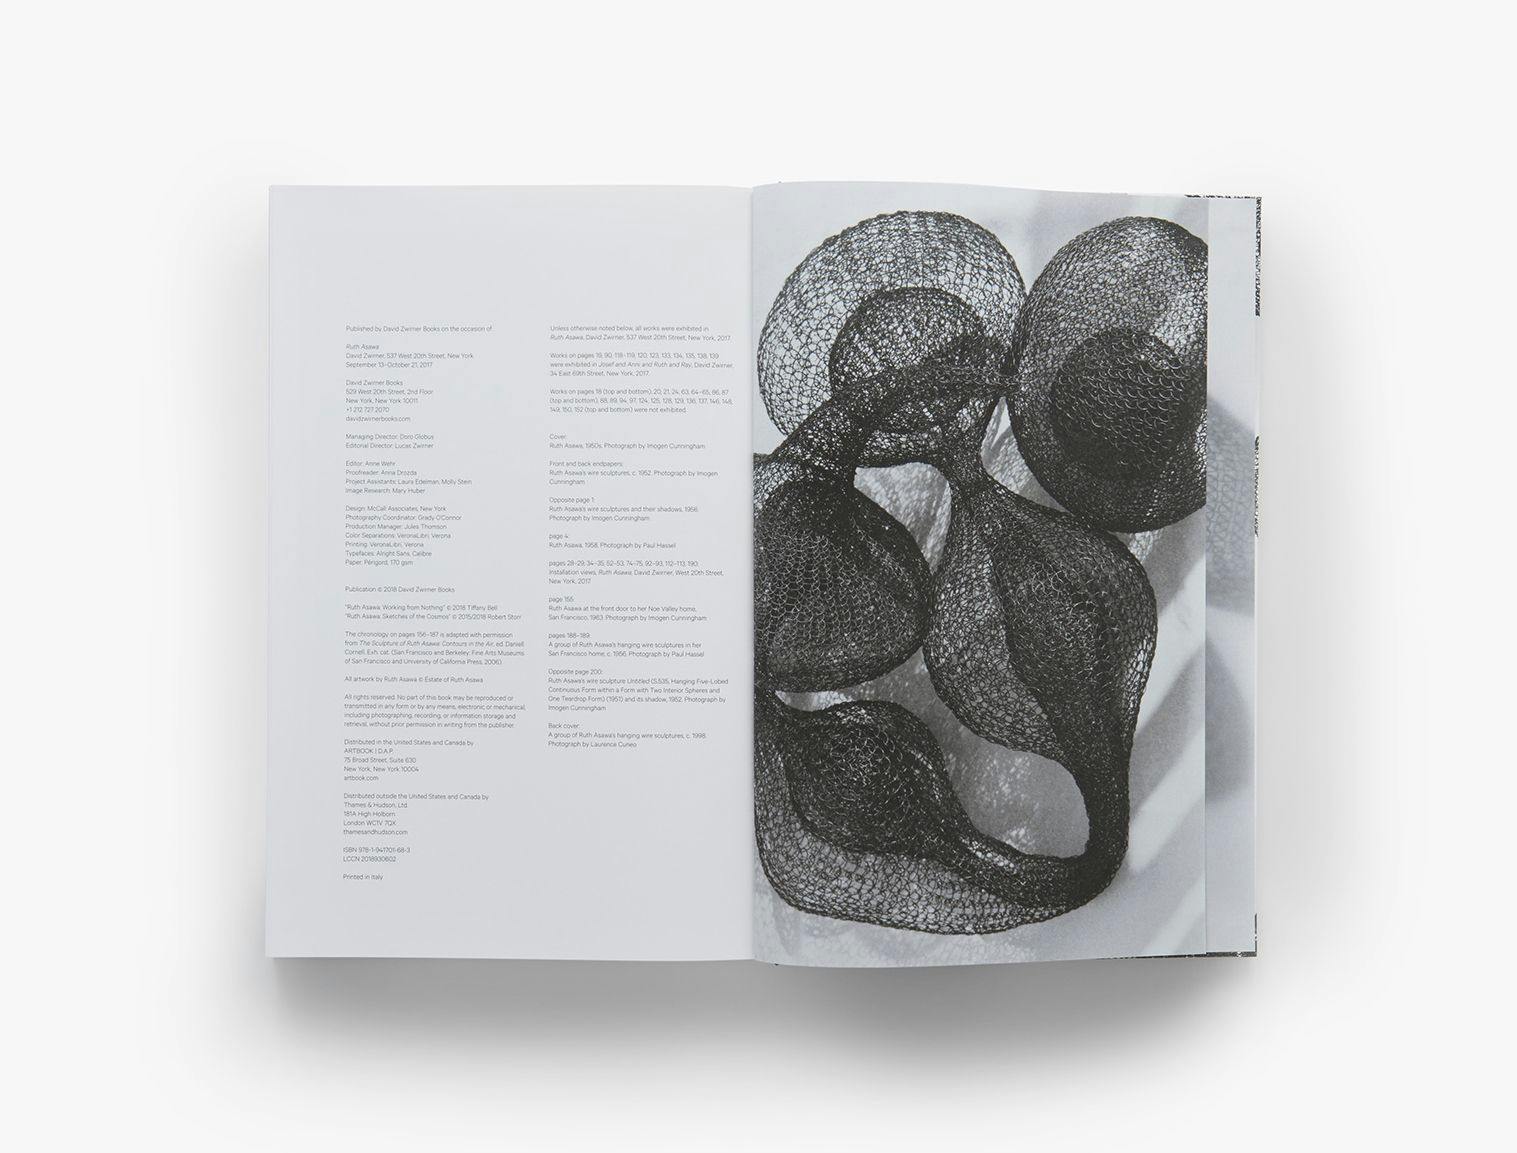 Interior spread from a book titled Ruth Asawa, published by David Zwirner Books in 2018.